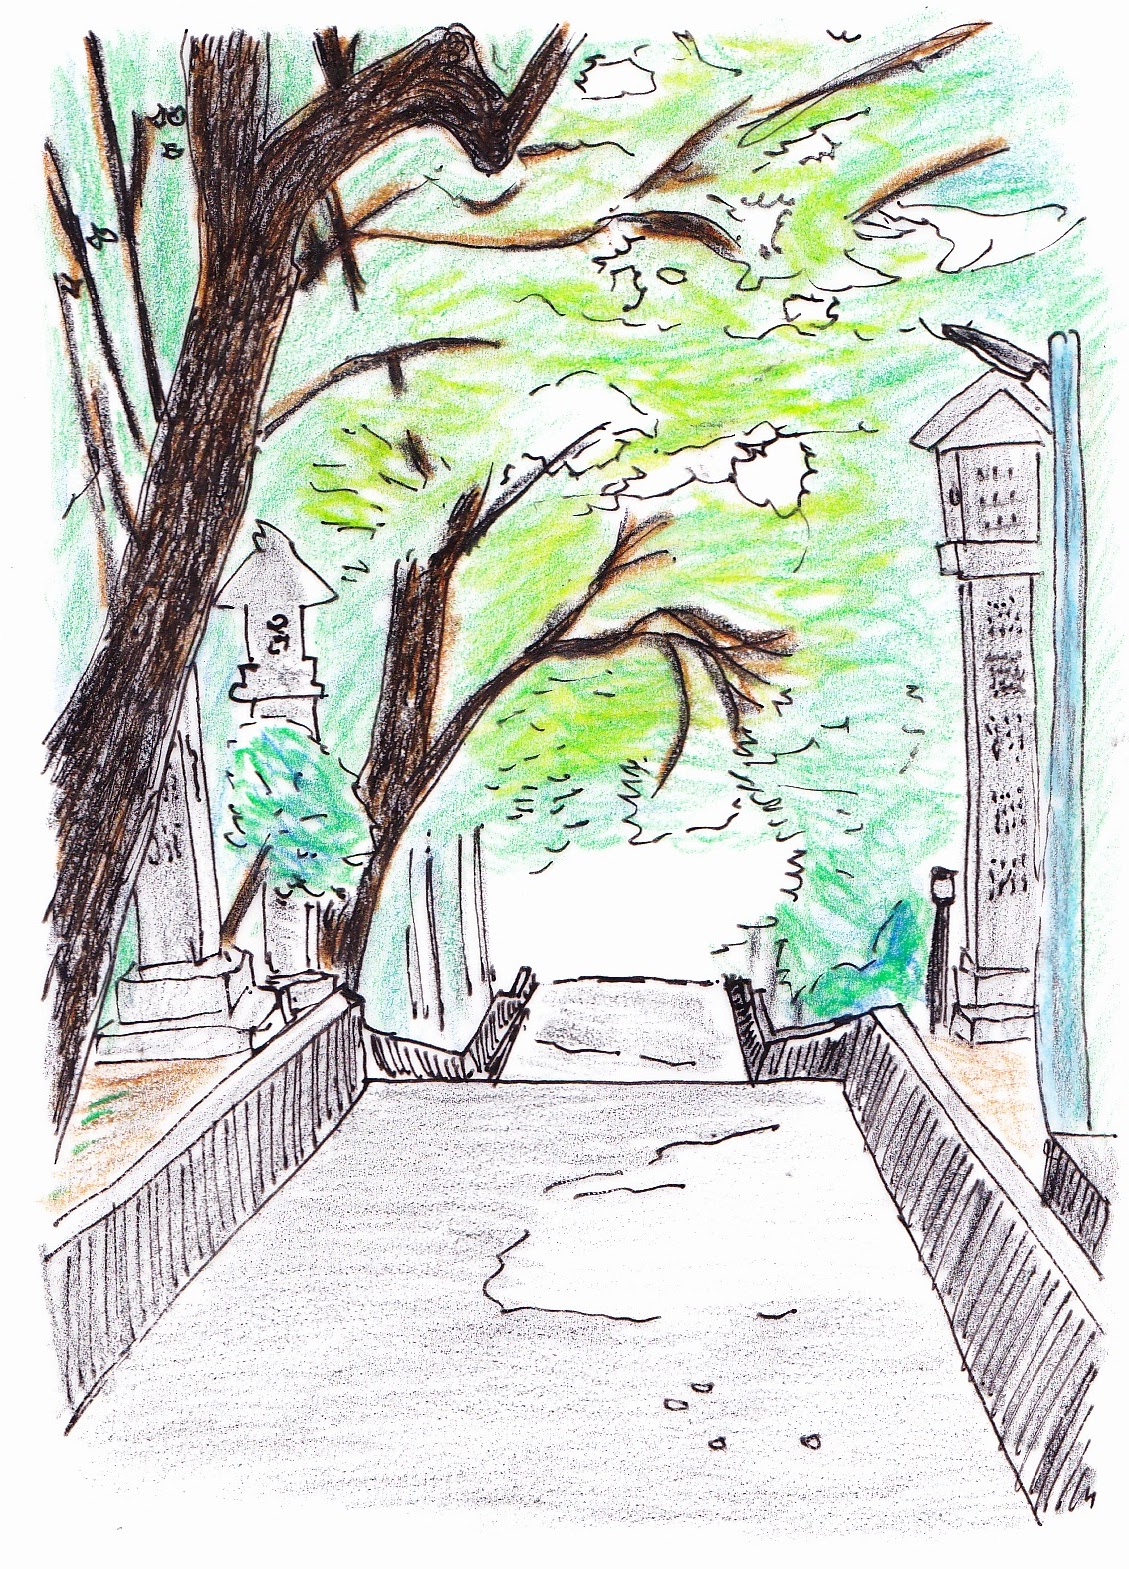 The approach to the shrine is a tunnel of trees　～神社の参道は樹のトンネル～